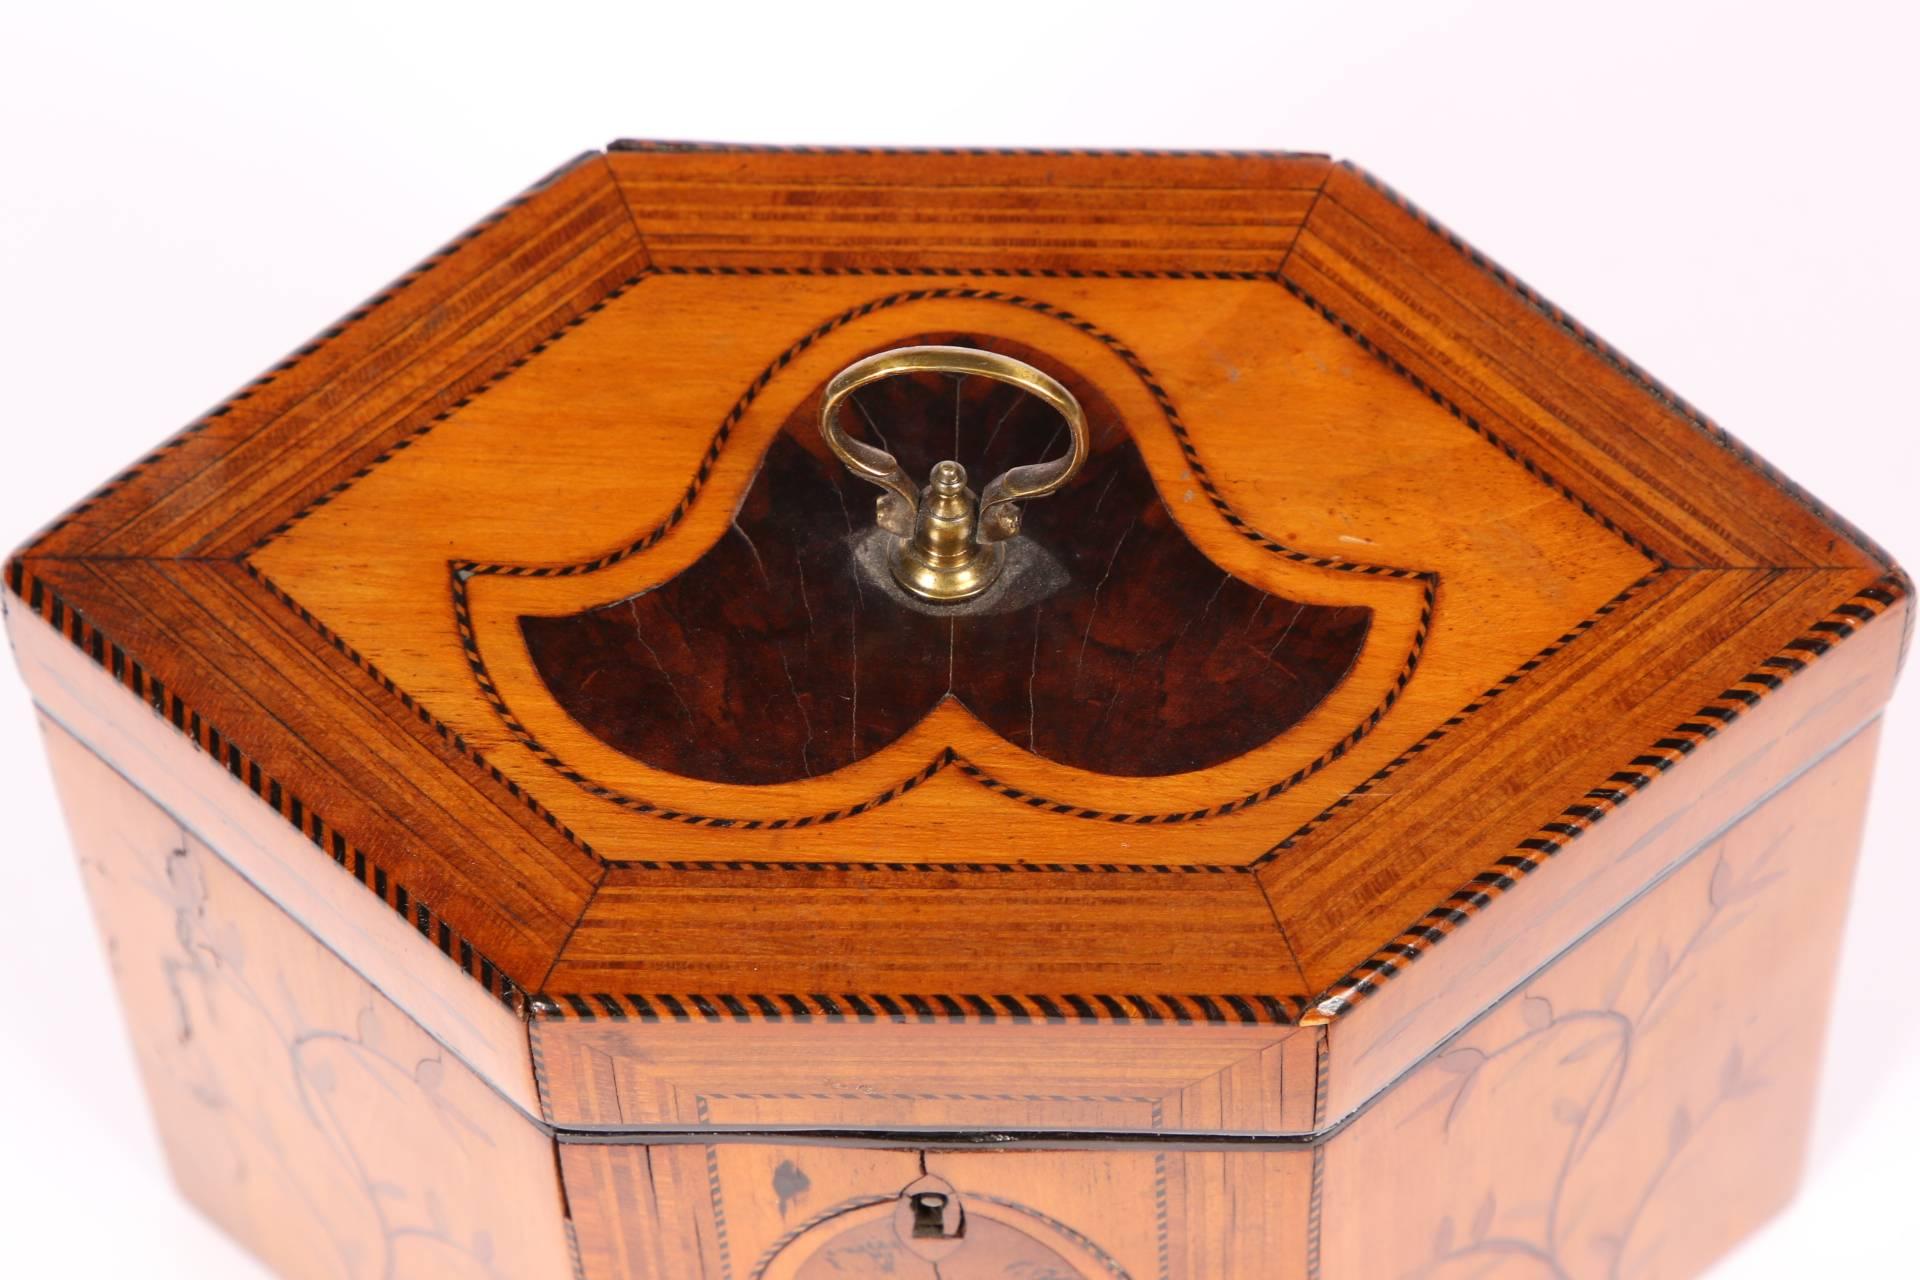 Elongated hexagonal shape in satinwood with mahogany banding on the top and front panel. The side front panels with inlaid leafy branches and the center oval in figured wood. The hinged lid with a walnut inlaid curvilinear motif. All edges and